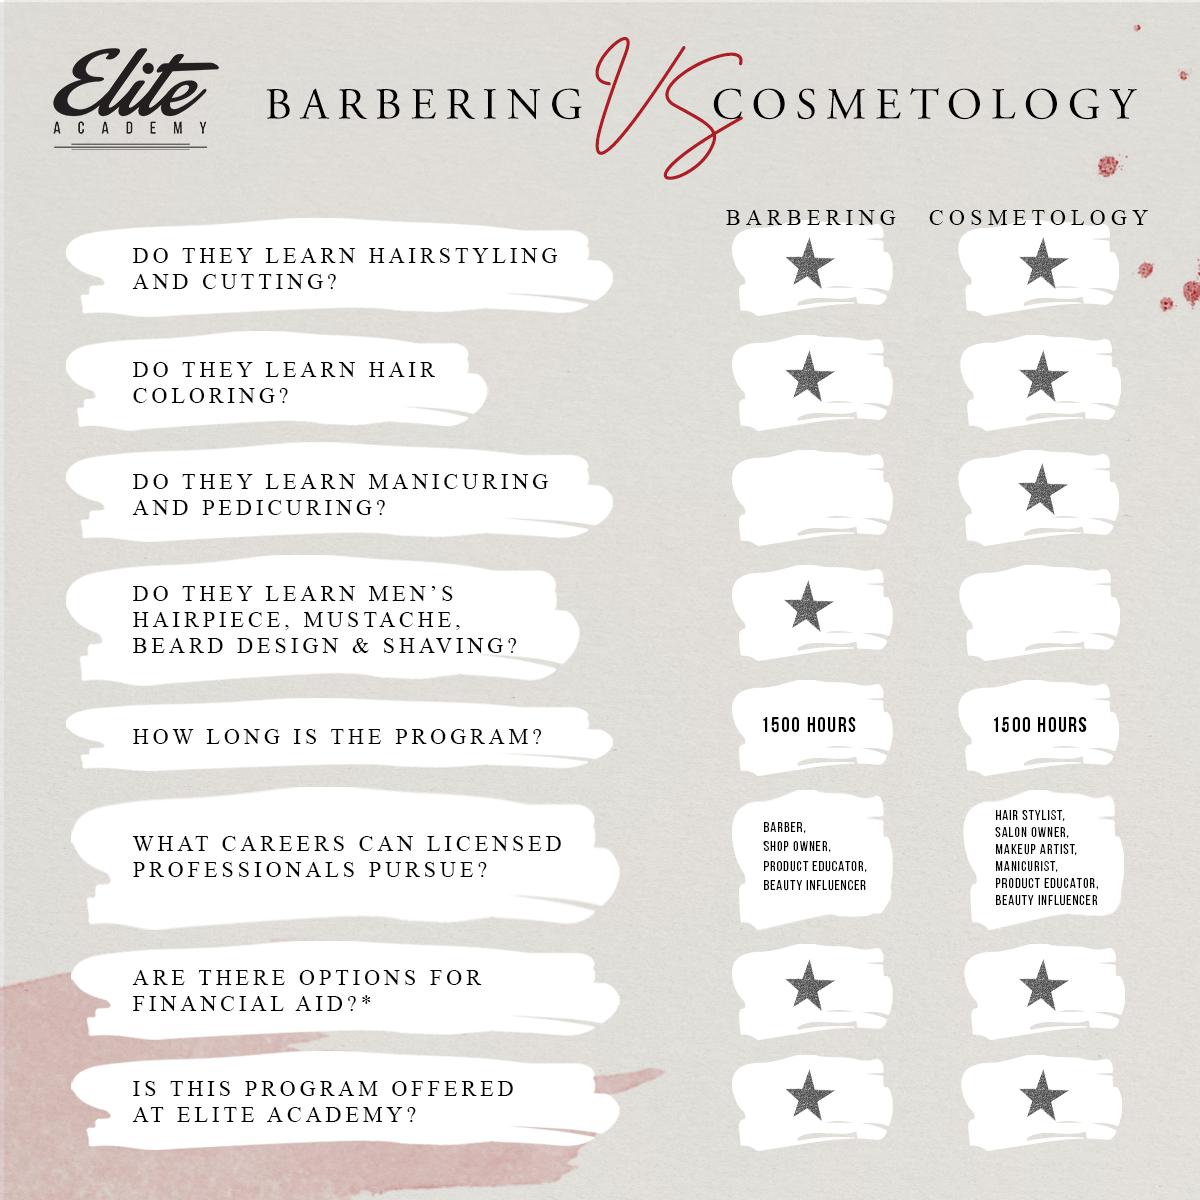 table showing the differences between cosmetology and barbering